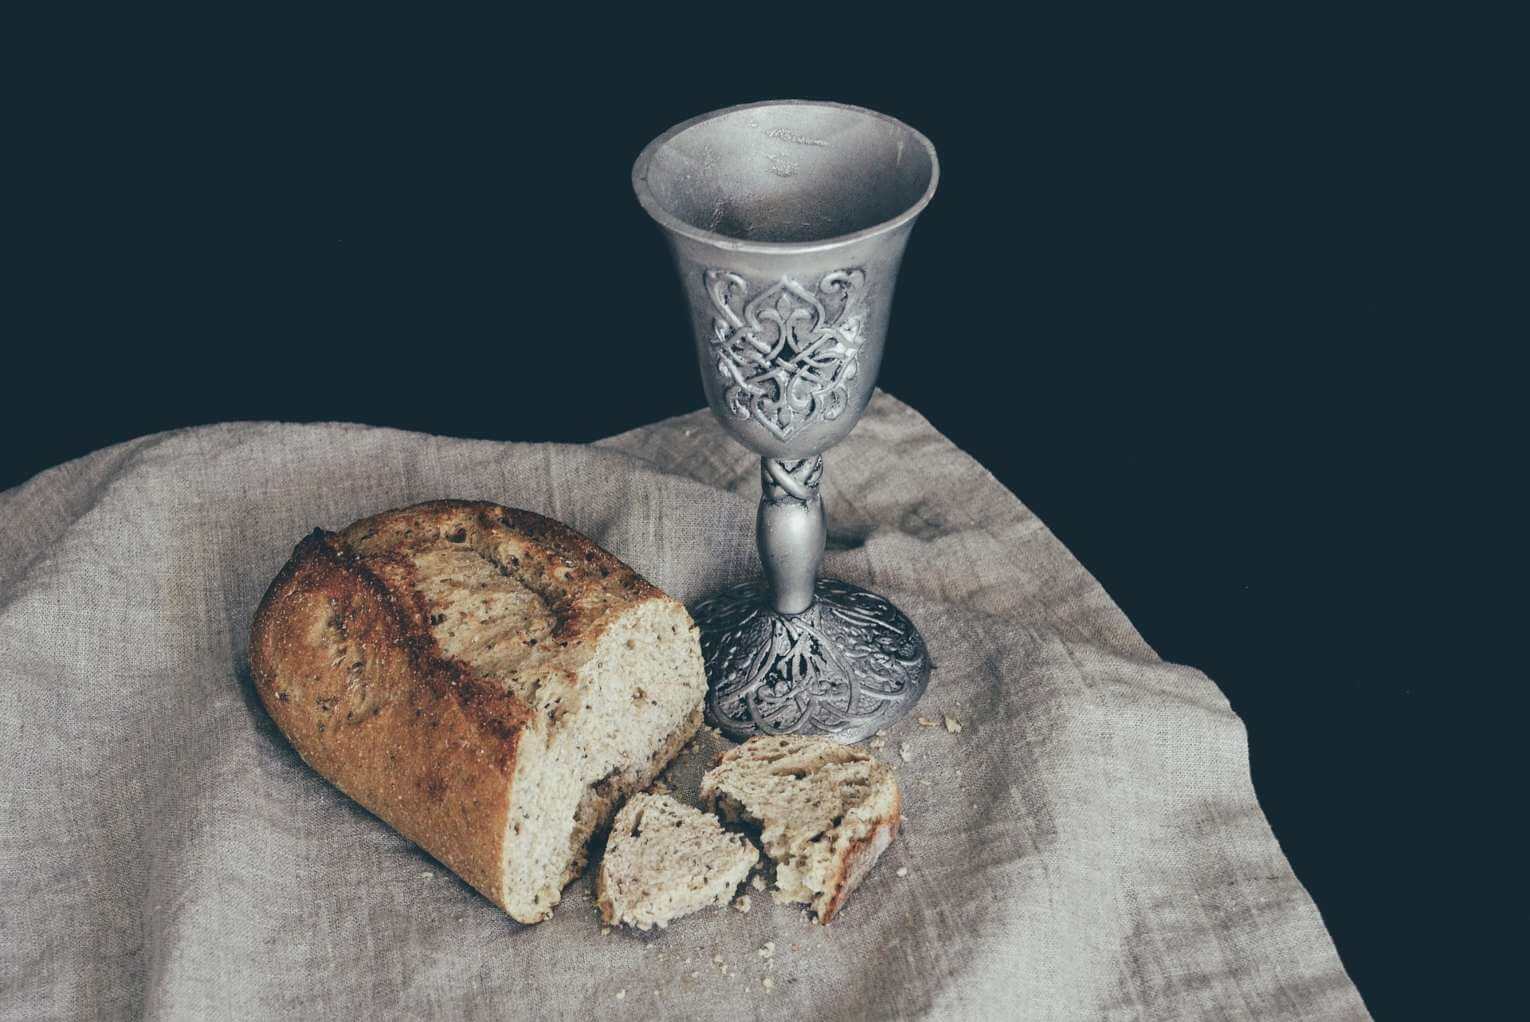 What Do We Celebrate at Communion?